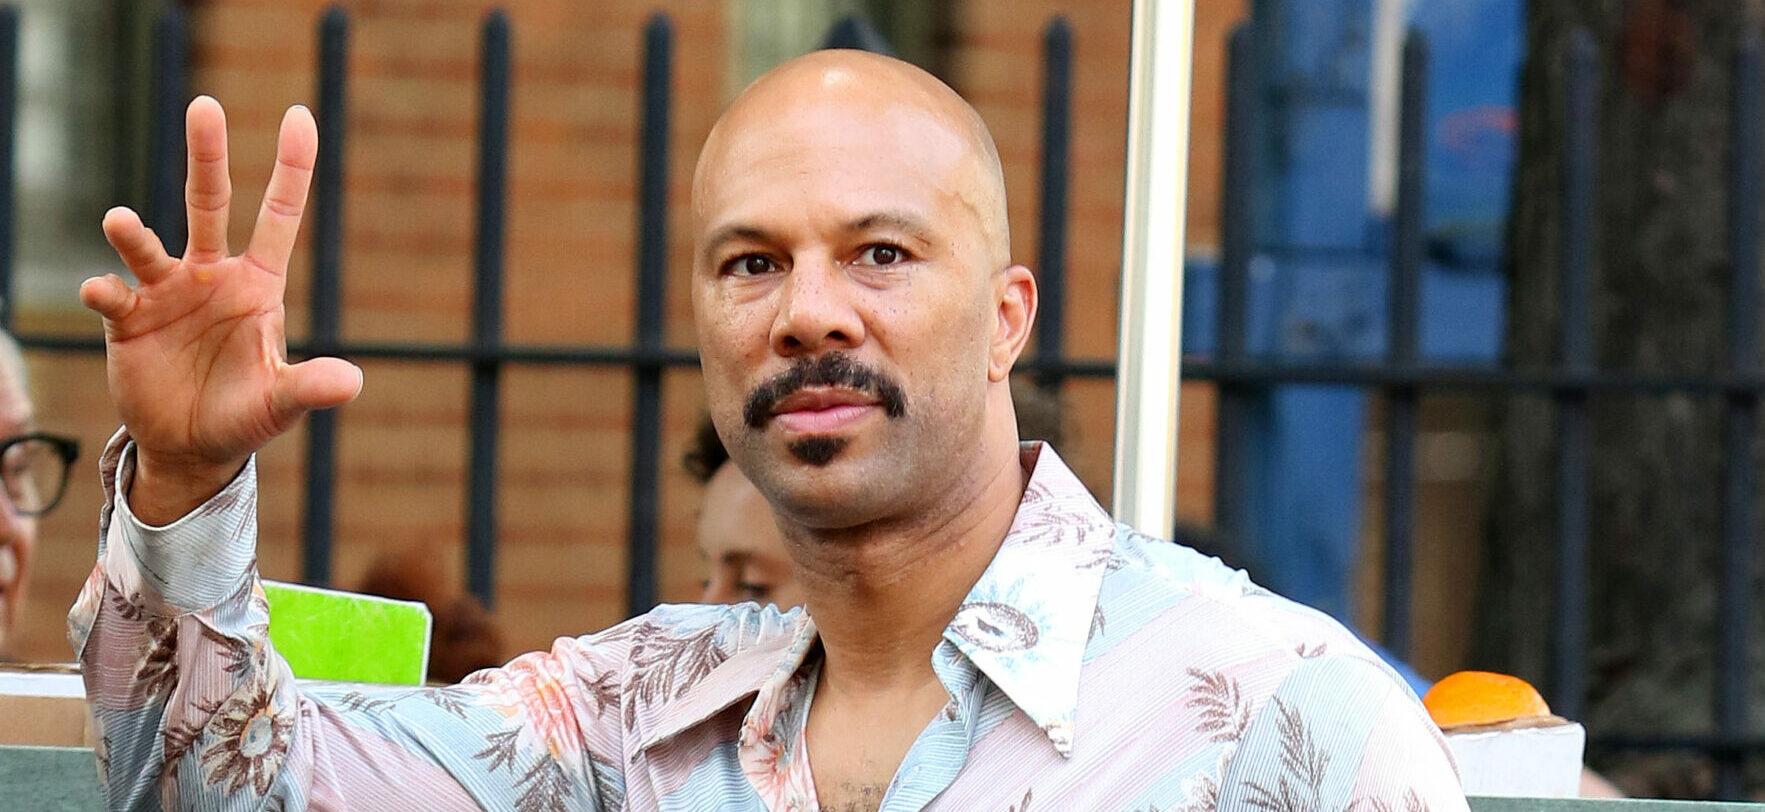 Common May Have Moved On From Ex Tiffany Haddish With This EGOT Winner